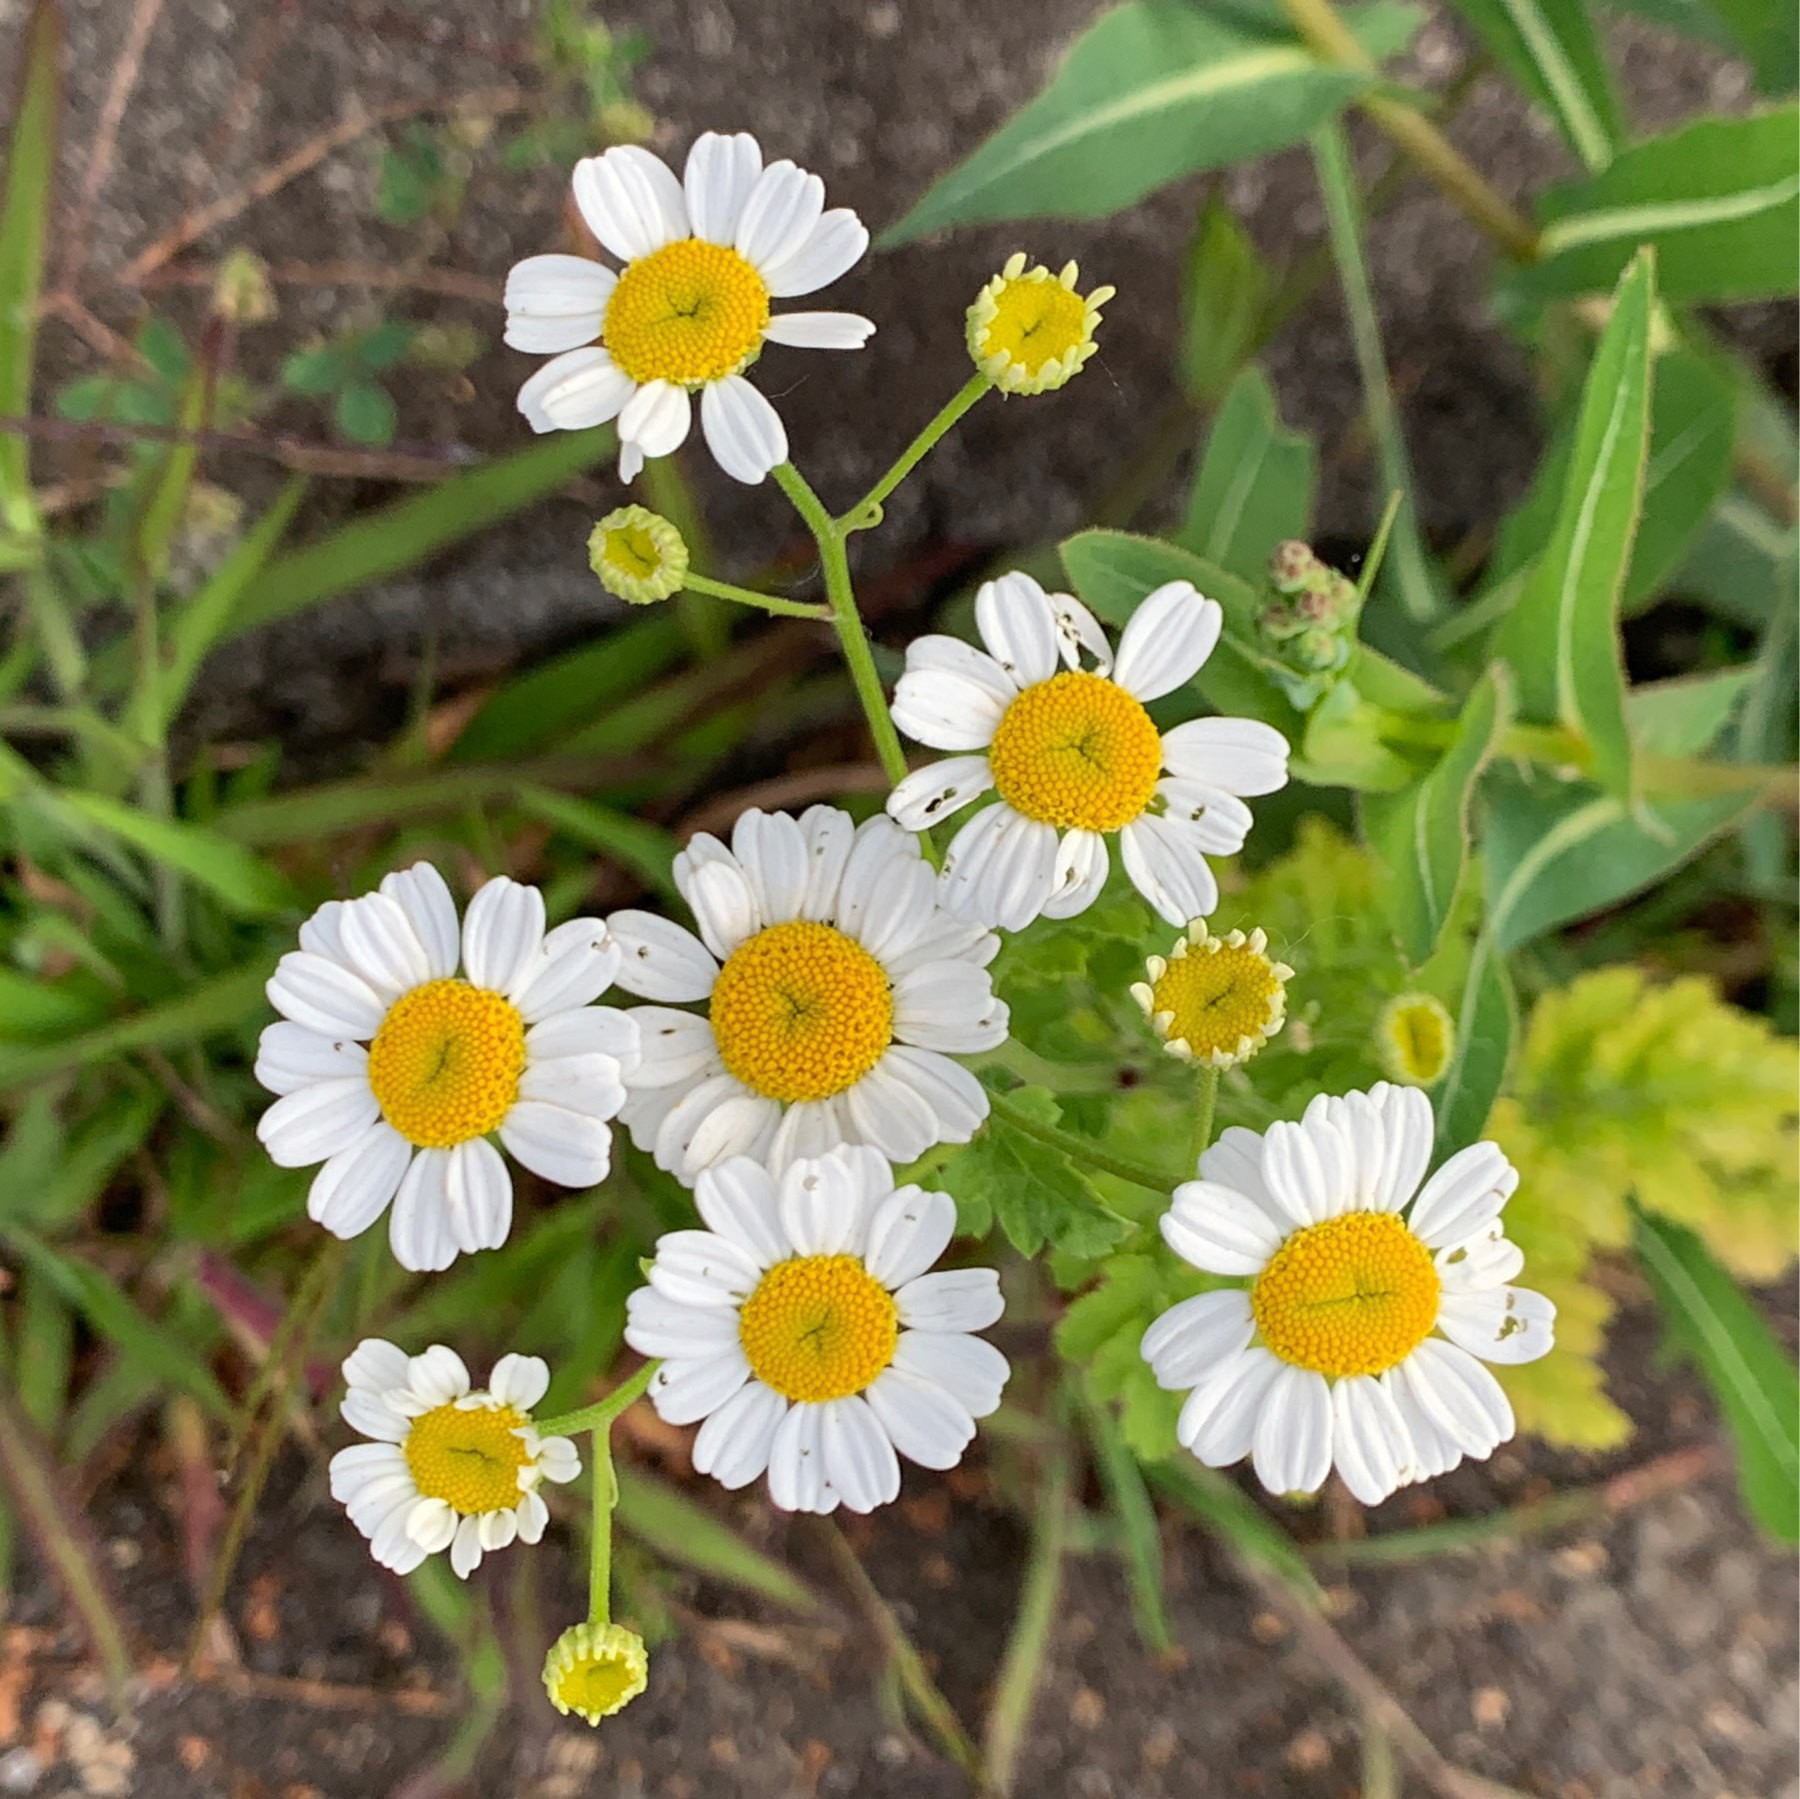 daisies maybe?